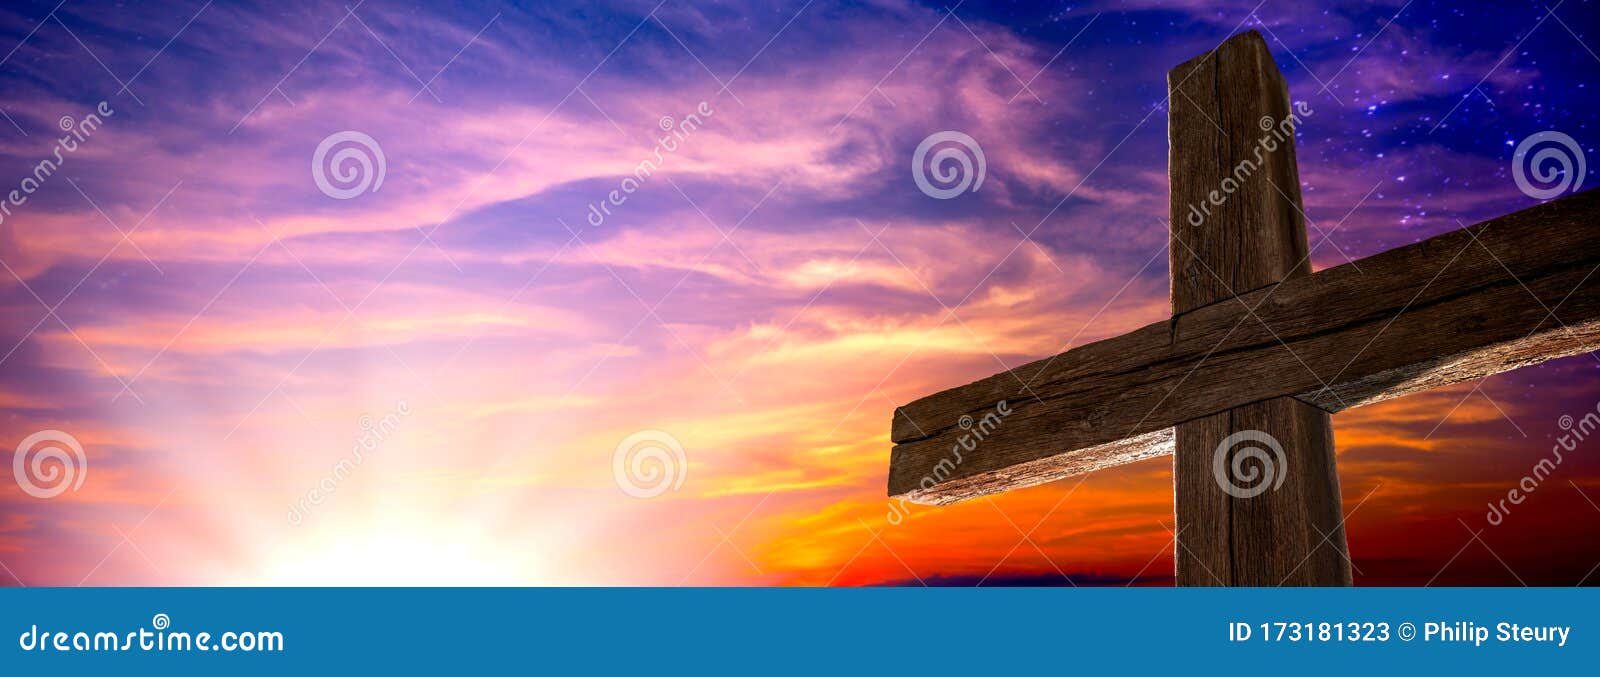 the old rugged cross at sunrise with clouds and starry sky